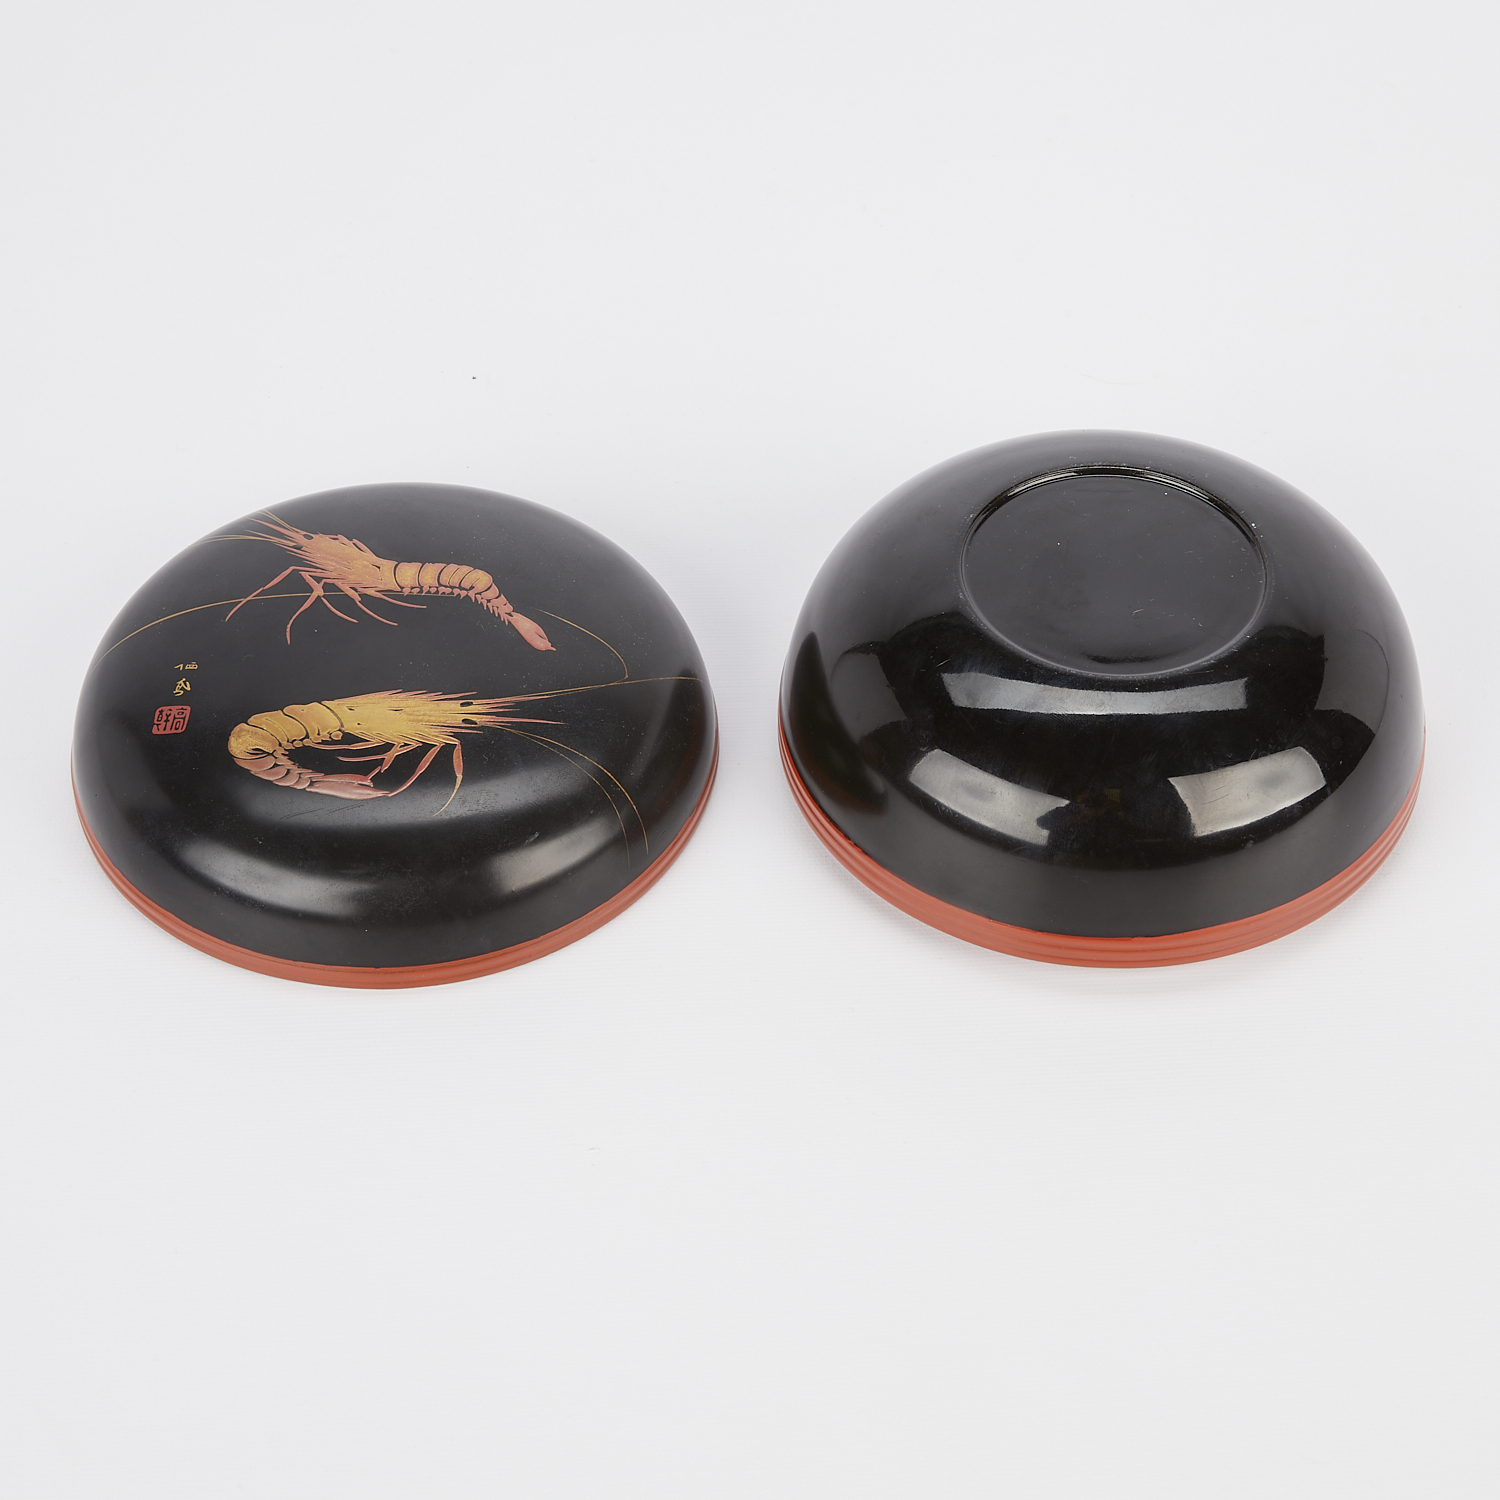 2 Japanese Lacquerware Boxes w/ Crustaceans - Image 11 of 17